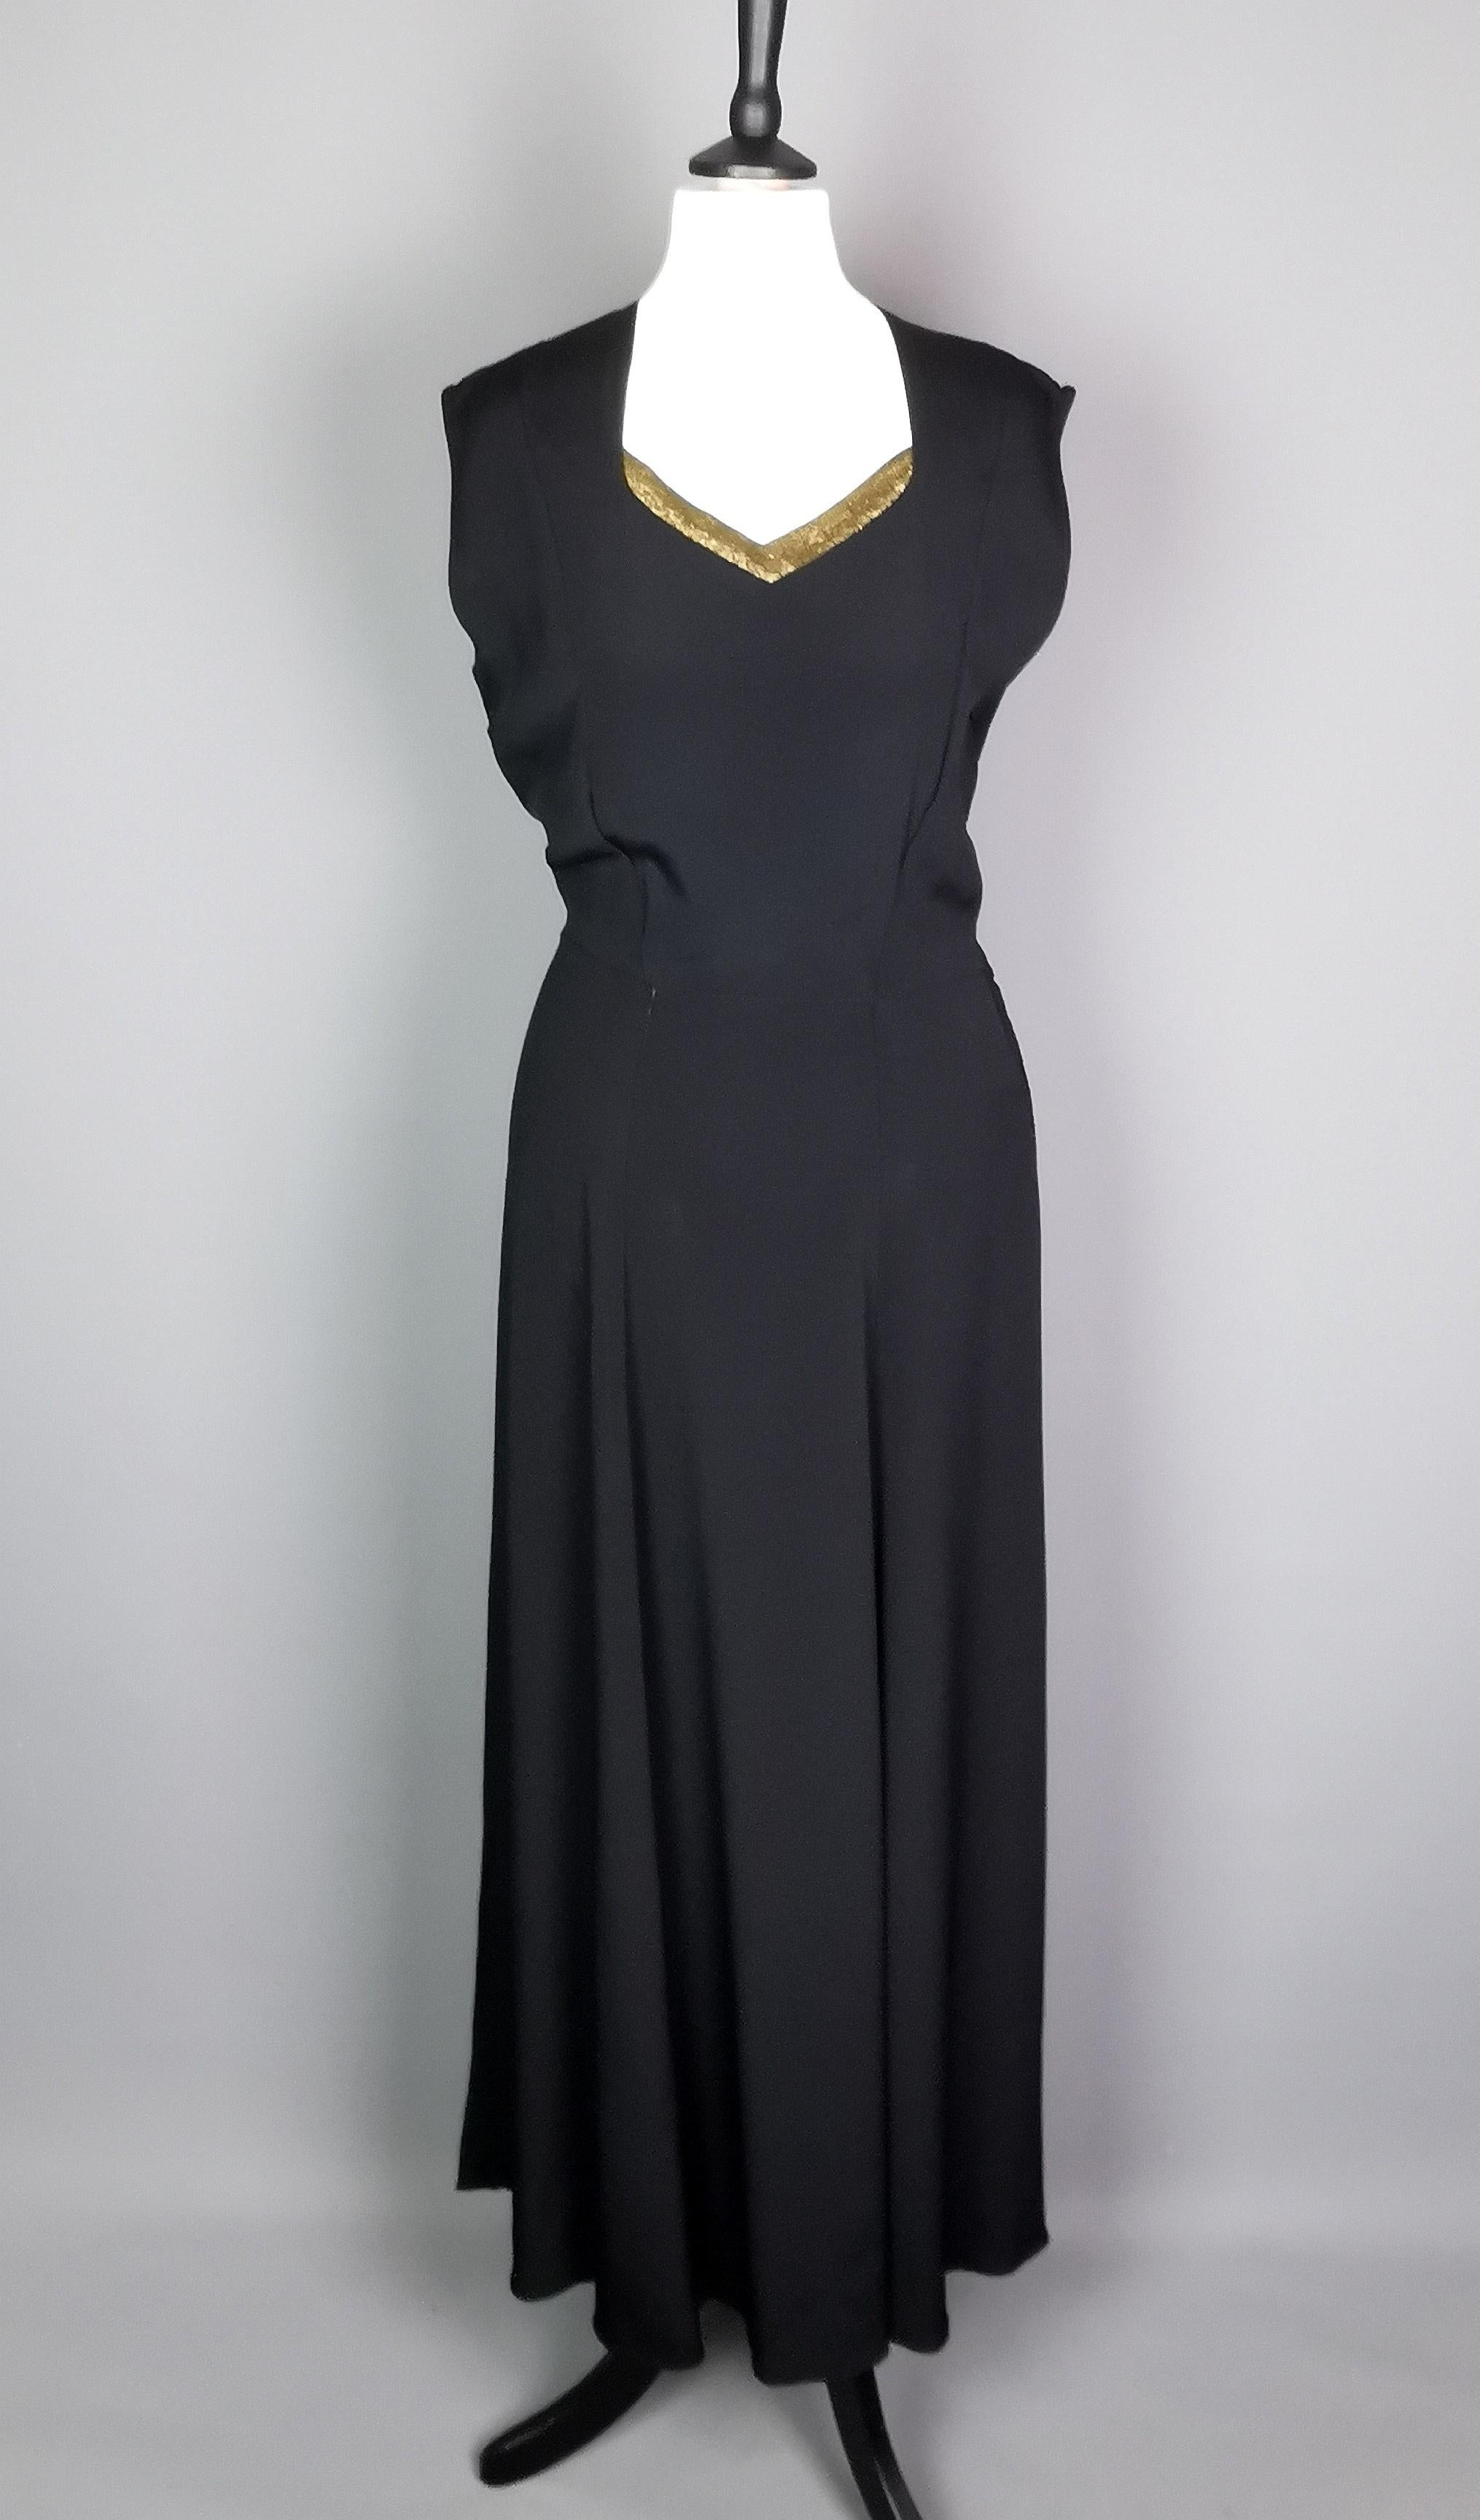 Vintage 1930s Black rayon crepe bombshell dress, gold lame, evening gown  For Sale 1